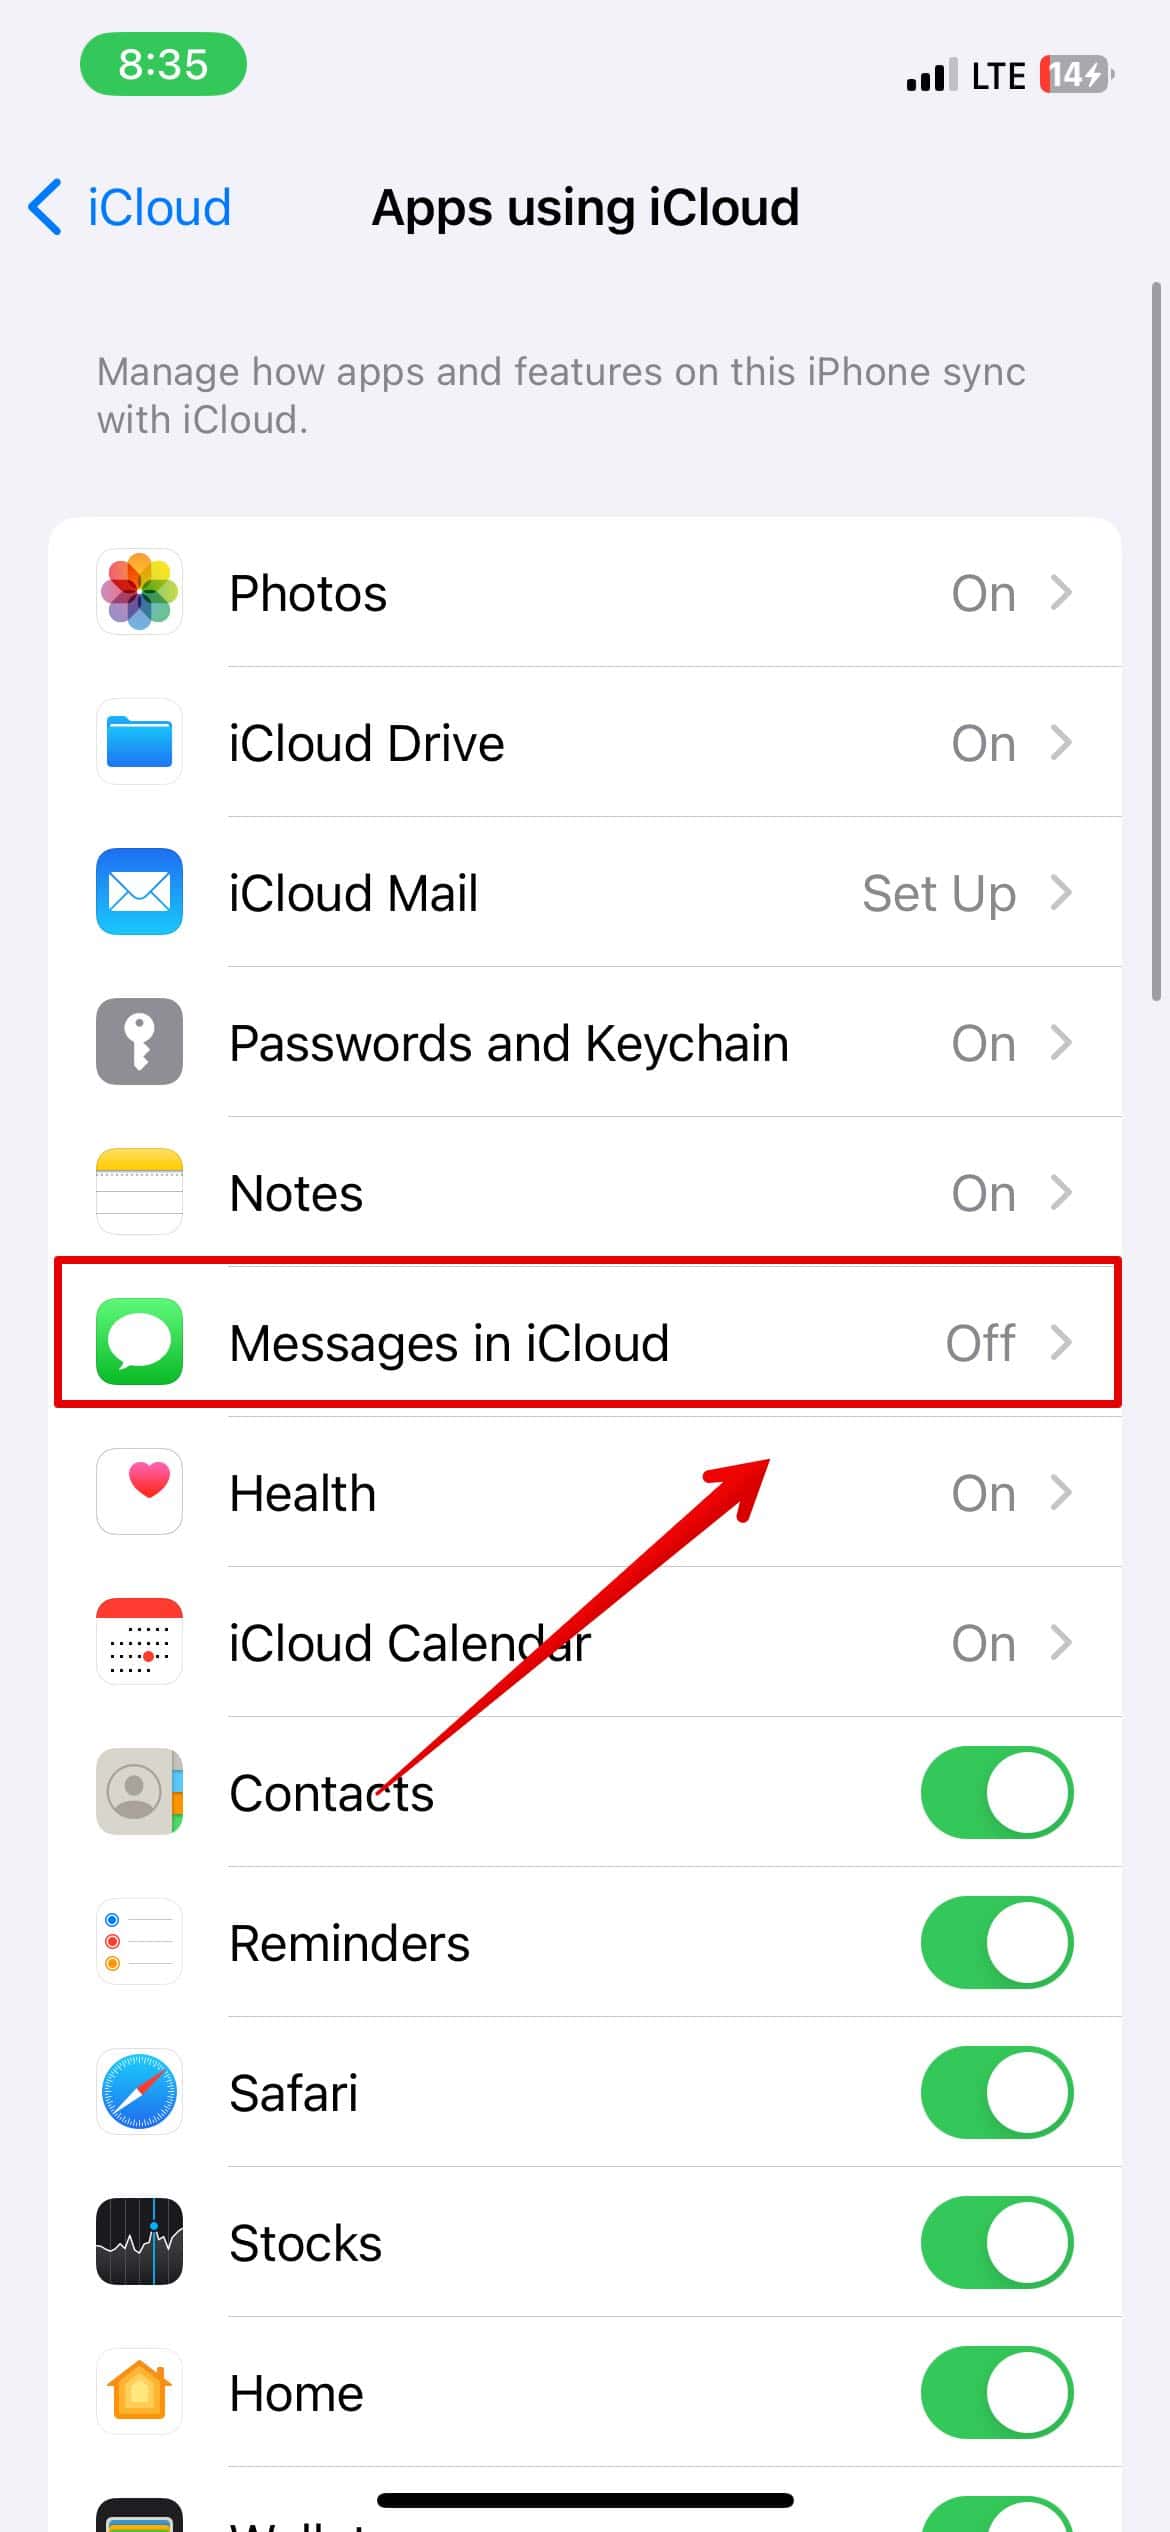 Tap on Messages in iCloud